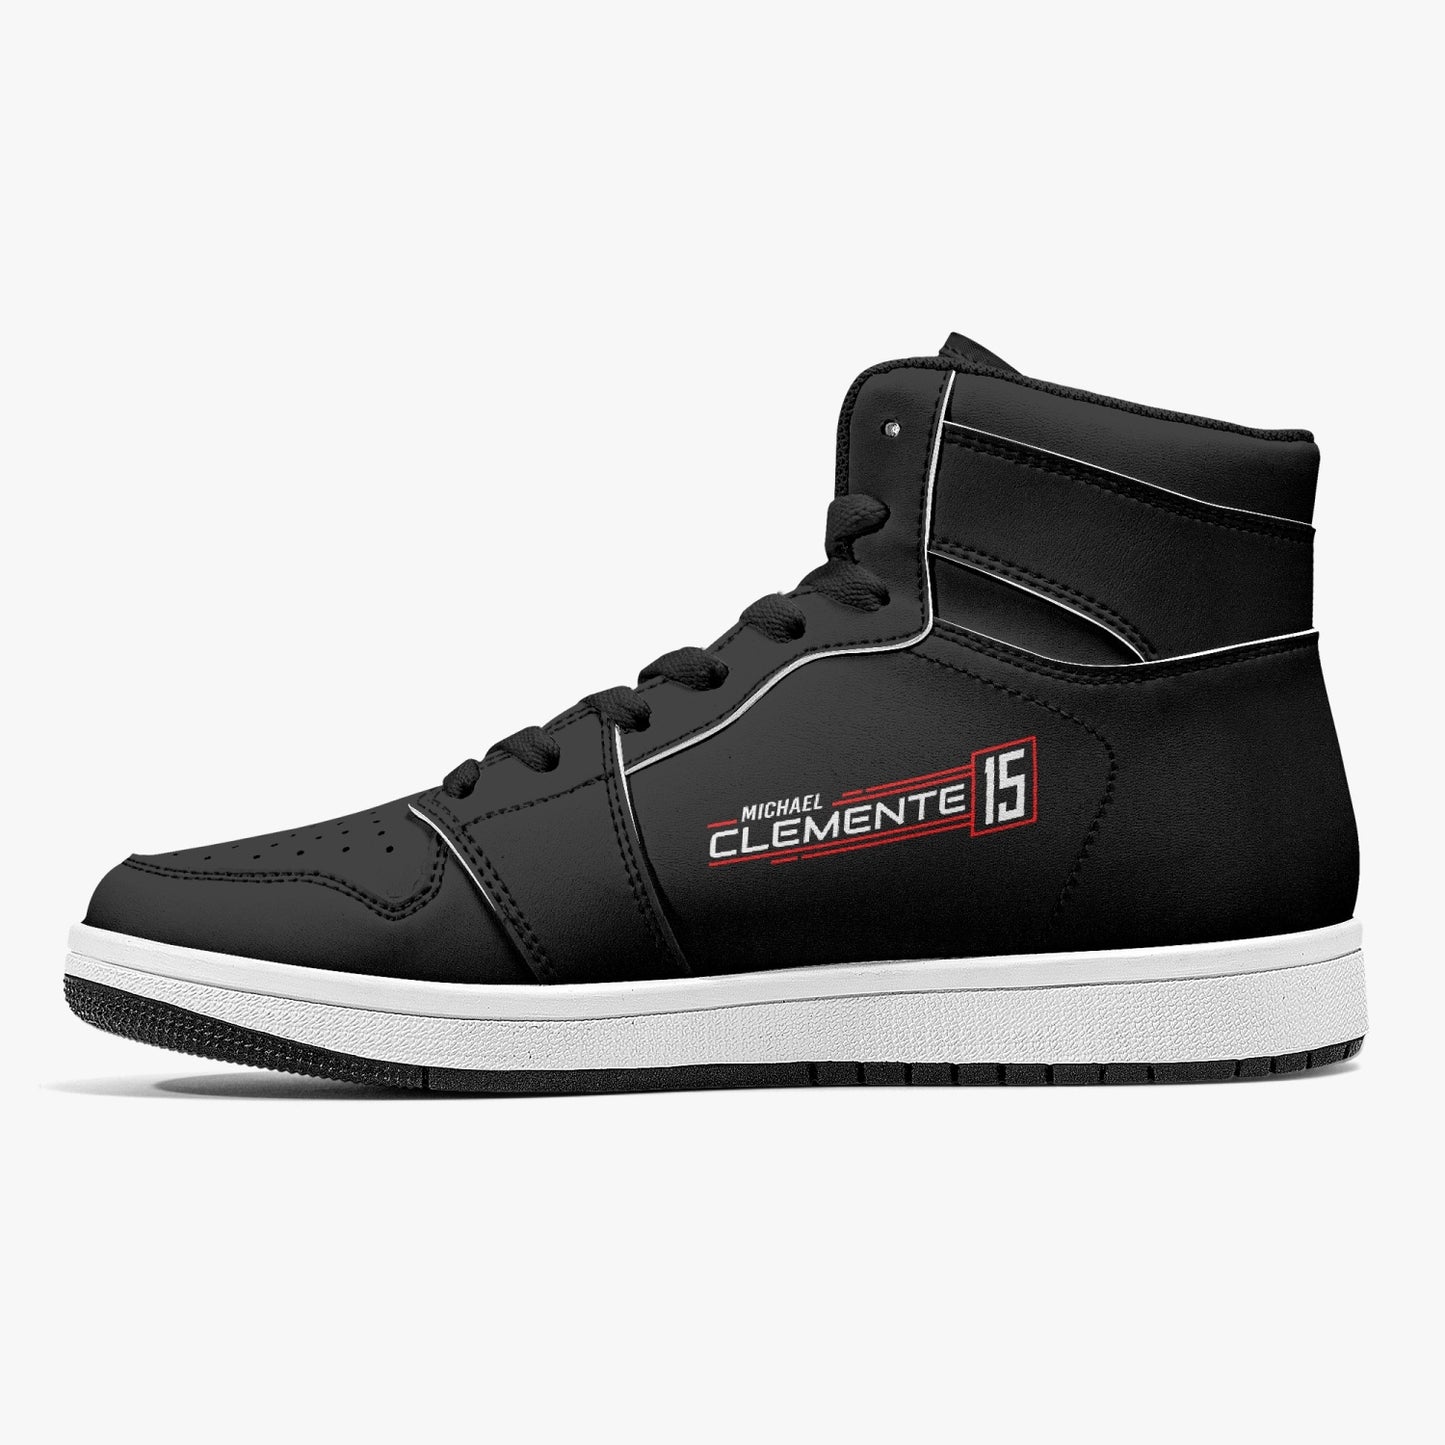 MICHAEL CLEMENTE 15 Ultimate High-Top Leather Sneakers - full carbon